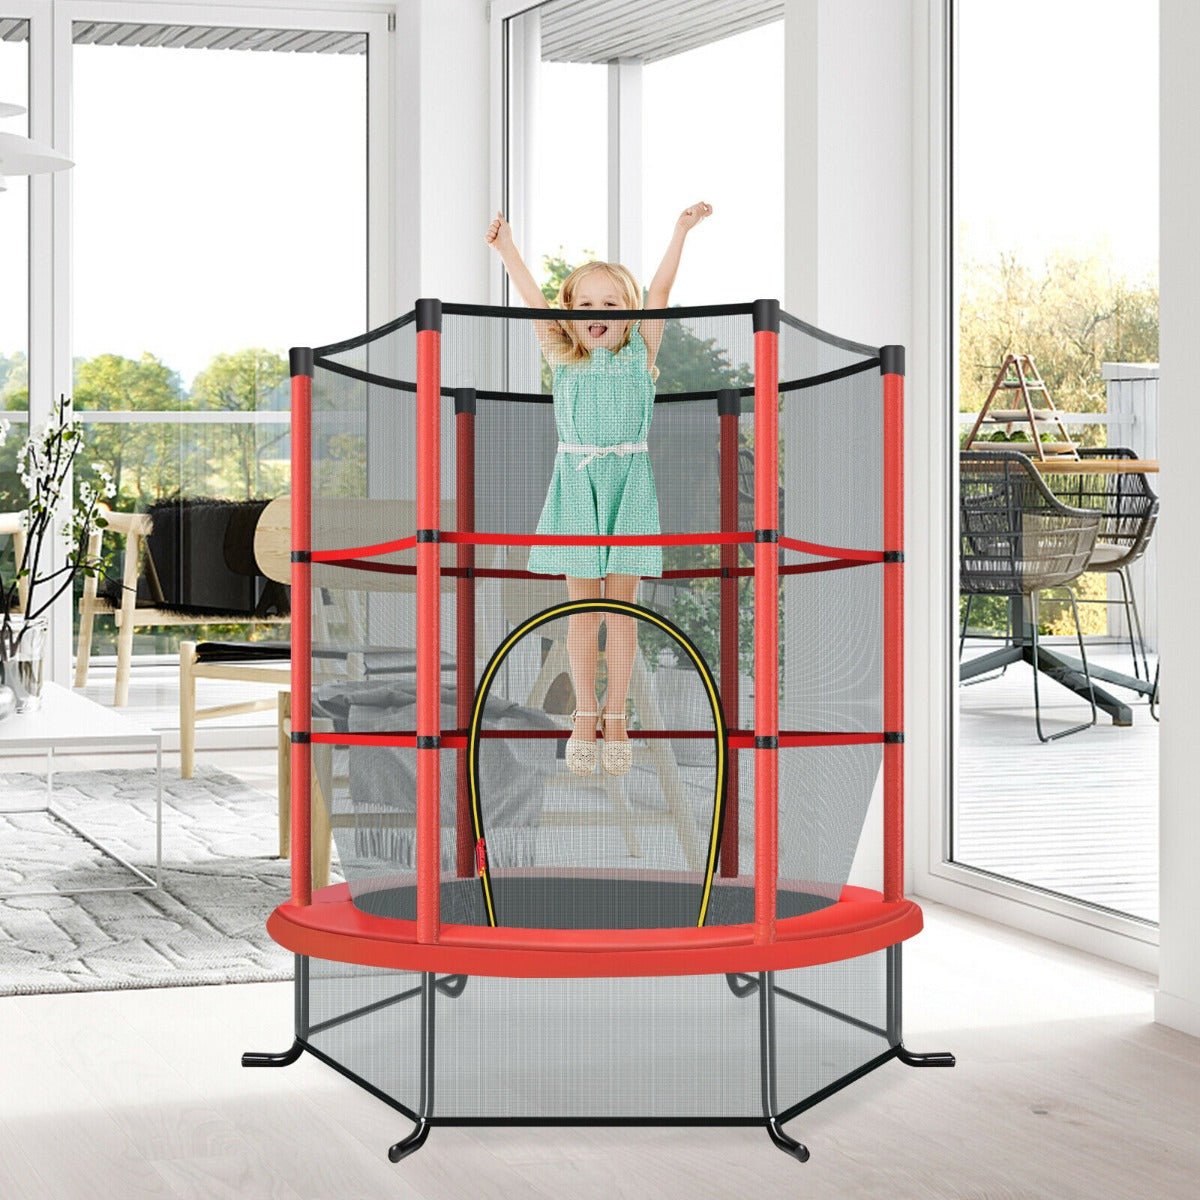 Jump into Joy: Mini Trampoline with Enclosure Net in Vibrant Red